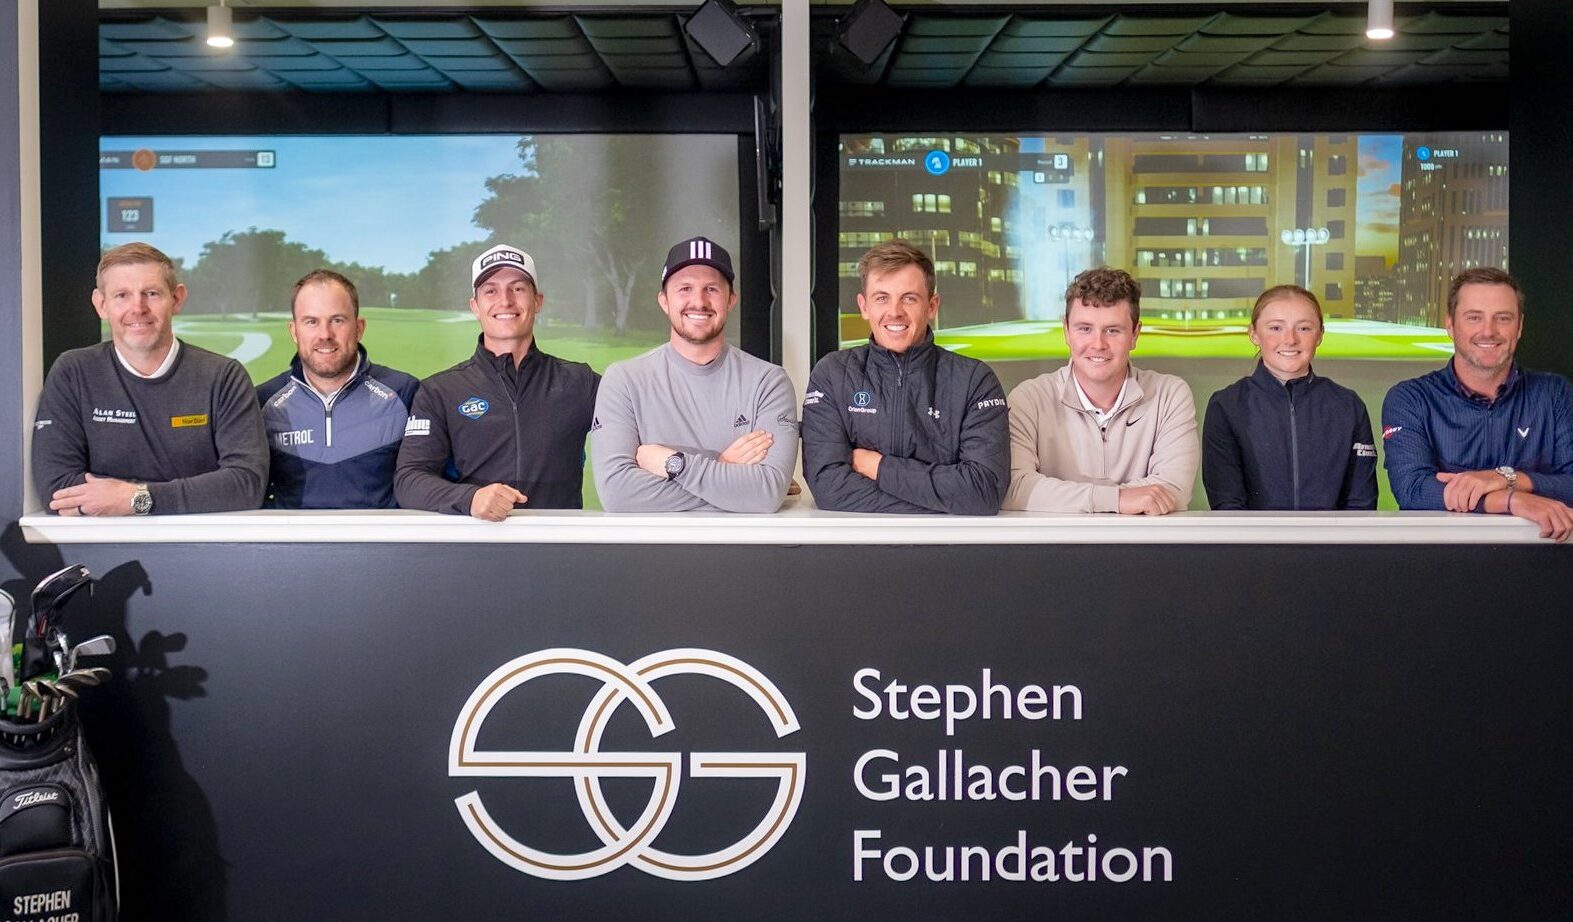 Stephen Gallacher with, from the left: Richie Ramsey, Calum Hill, Connor Syme, Grant Forrest, Bob MacIntyre, Louise Duncan and Marc Warren.